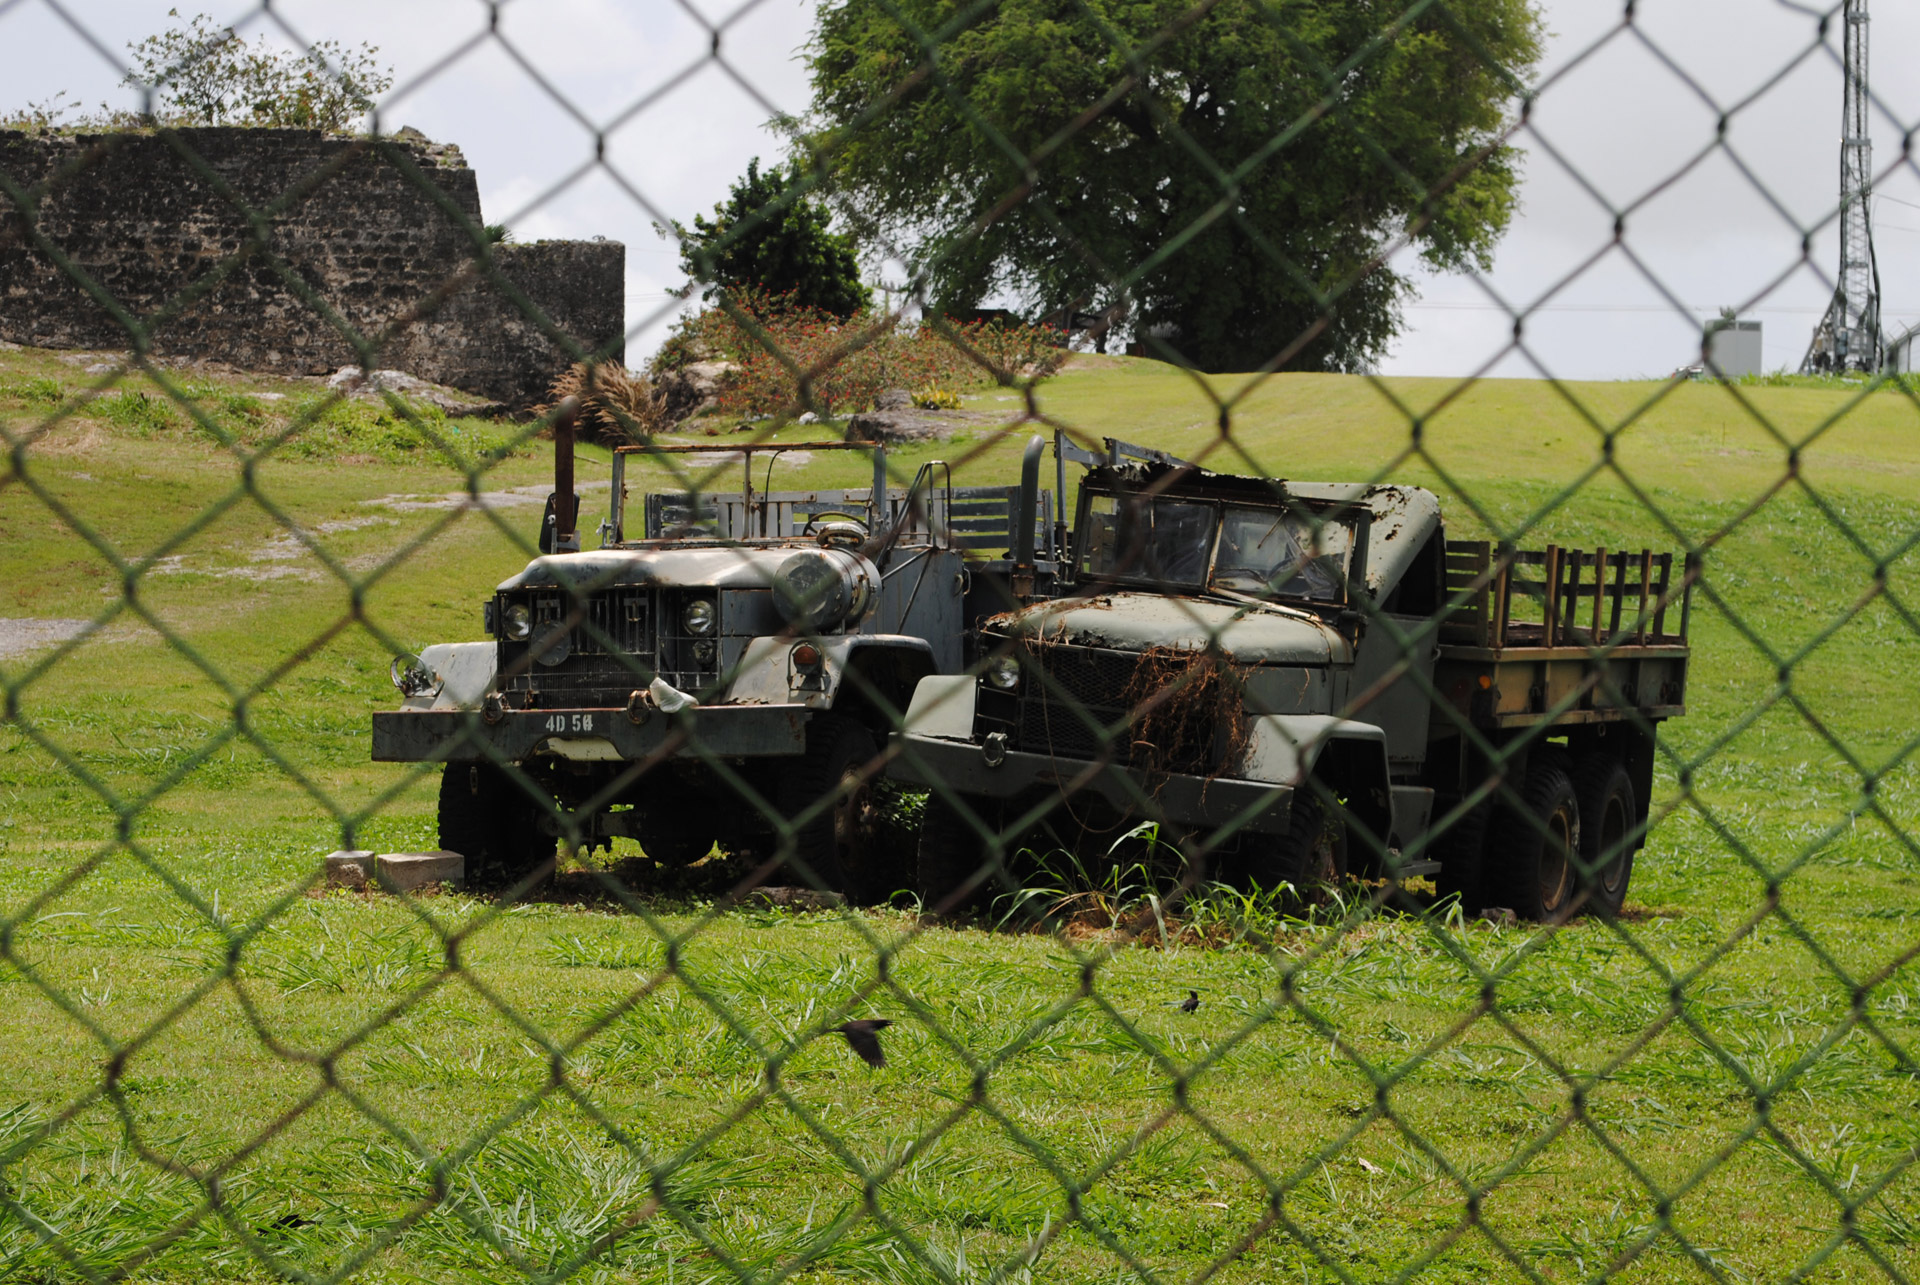 A couple of old army trucks left to rust